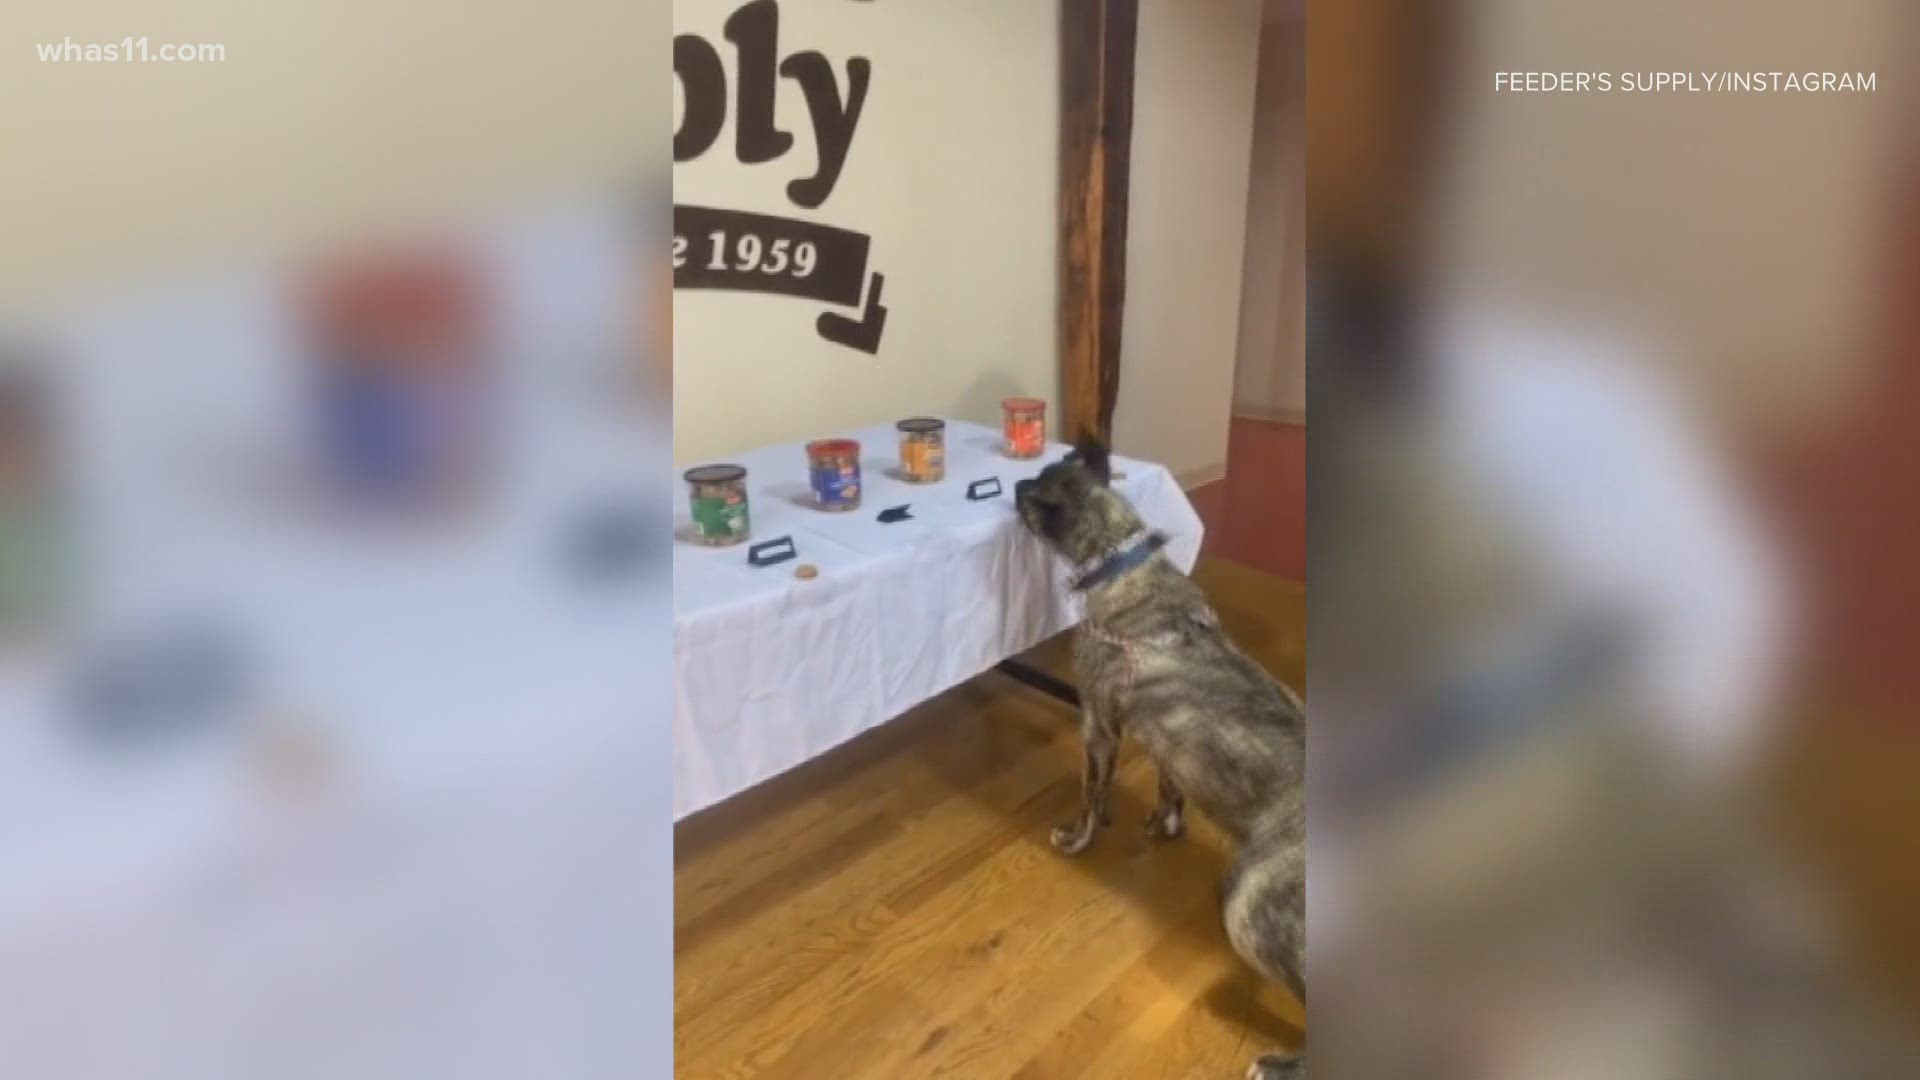 Ethan got to chose the winning flavor that will be a limited edition treat released by the Kentucky Humane Society, benefitting the organization.